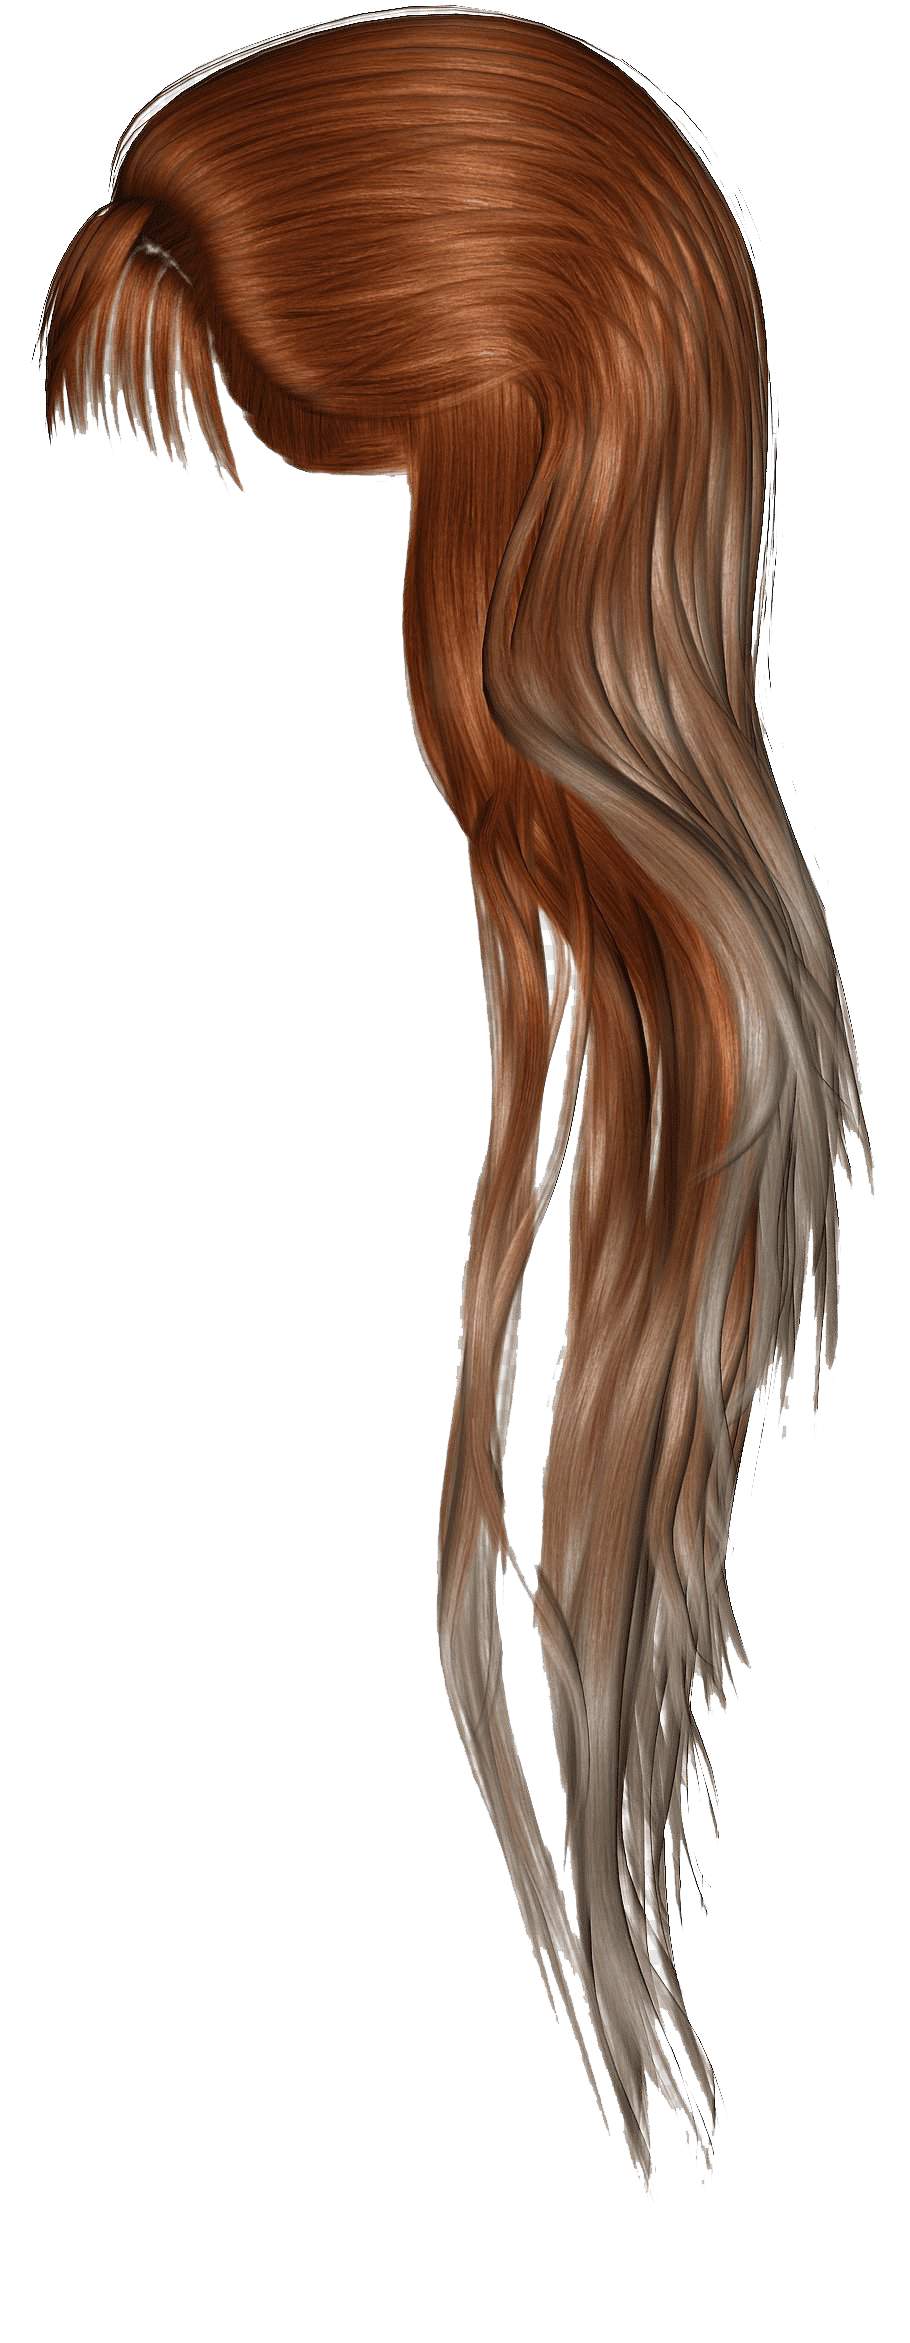 Brown Women Hair PNG HD Image - PNG All